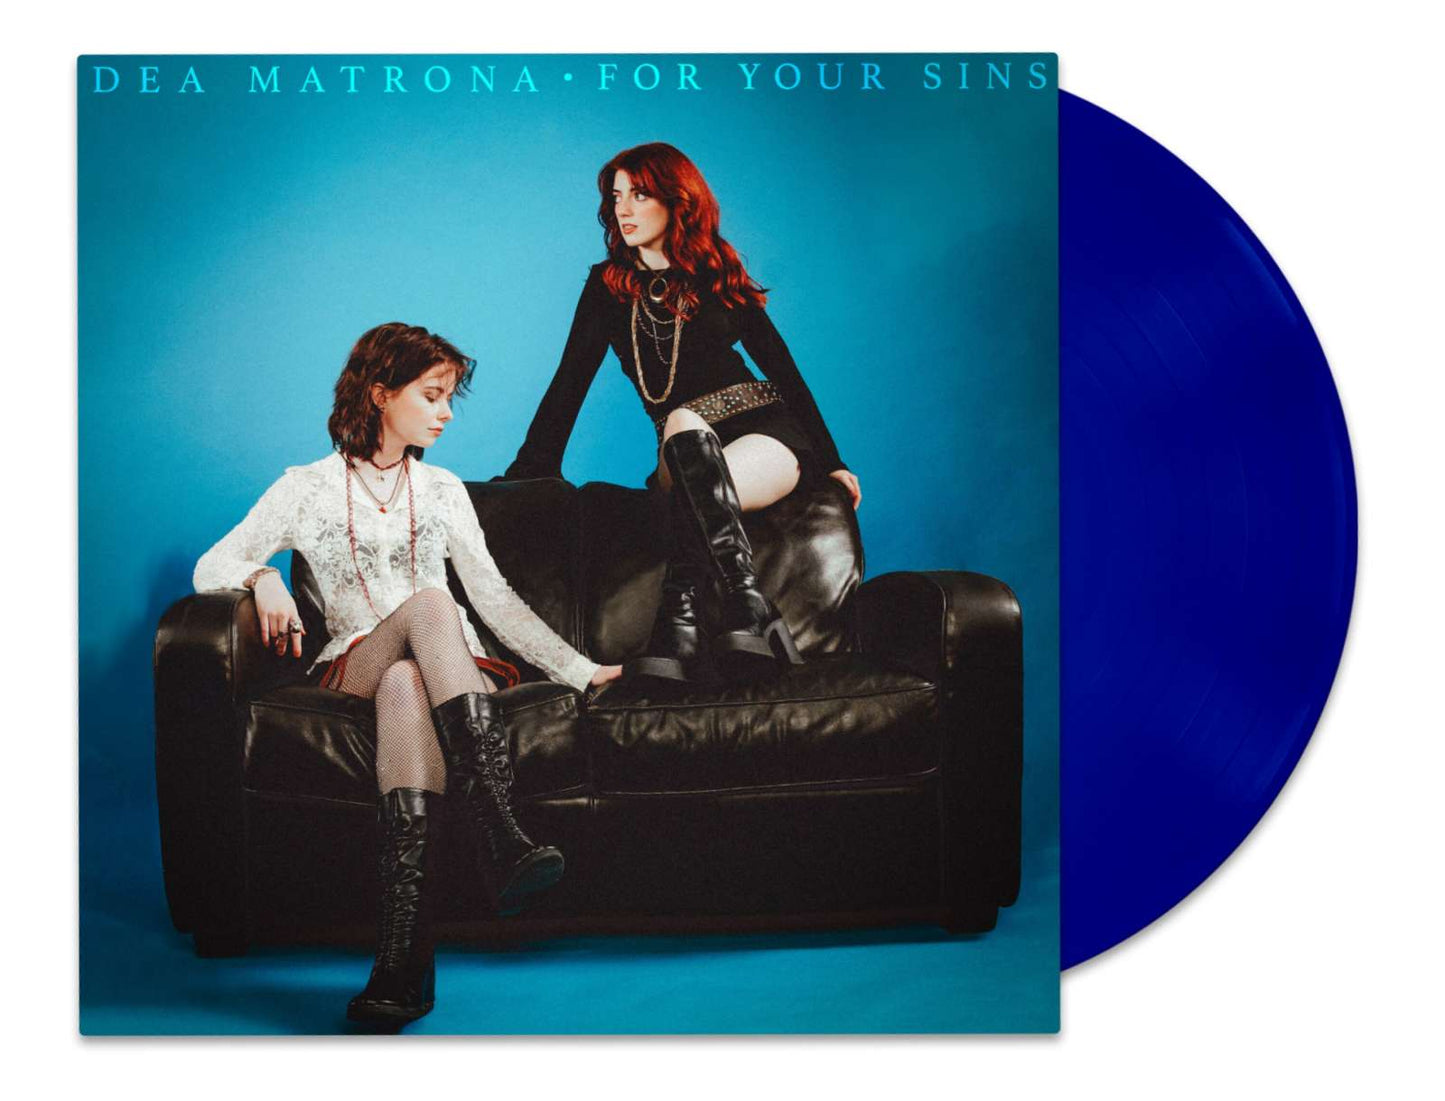 Dea Matrona: For Your Sins (Limited Indie Edition) (Blue Vinyl)